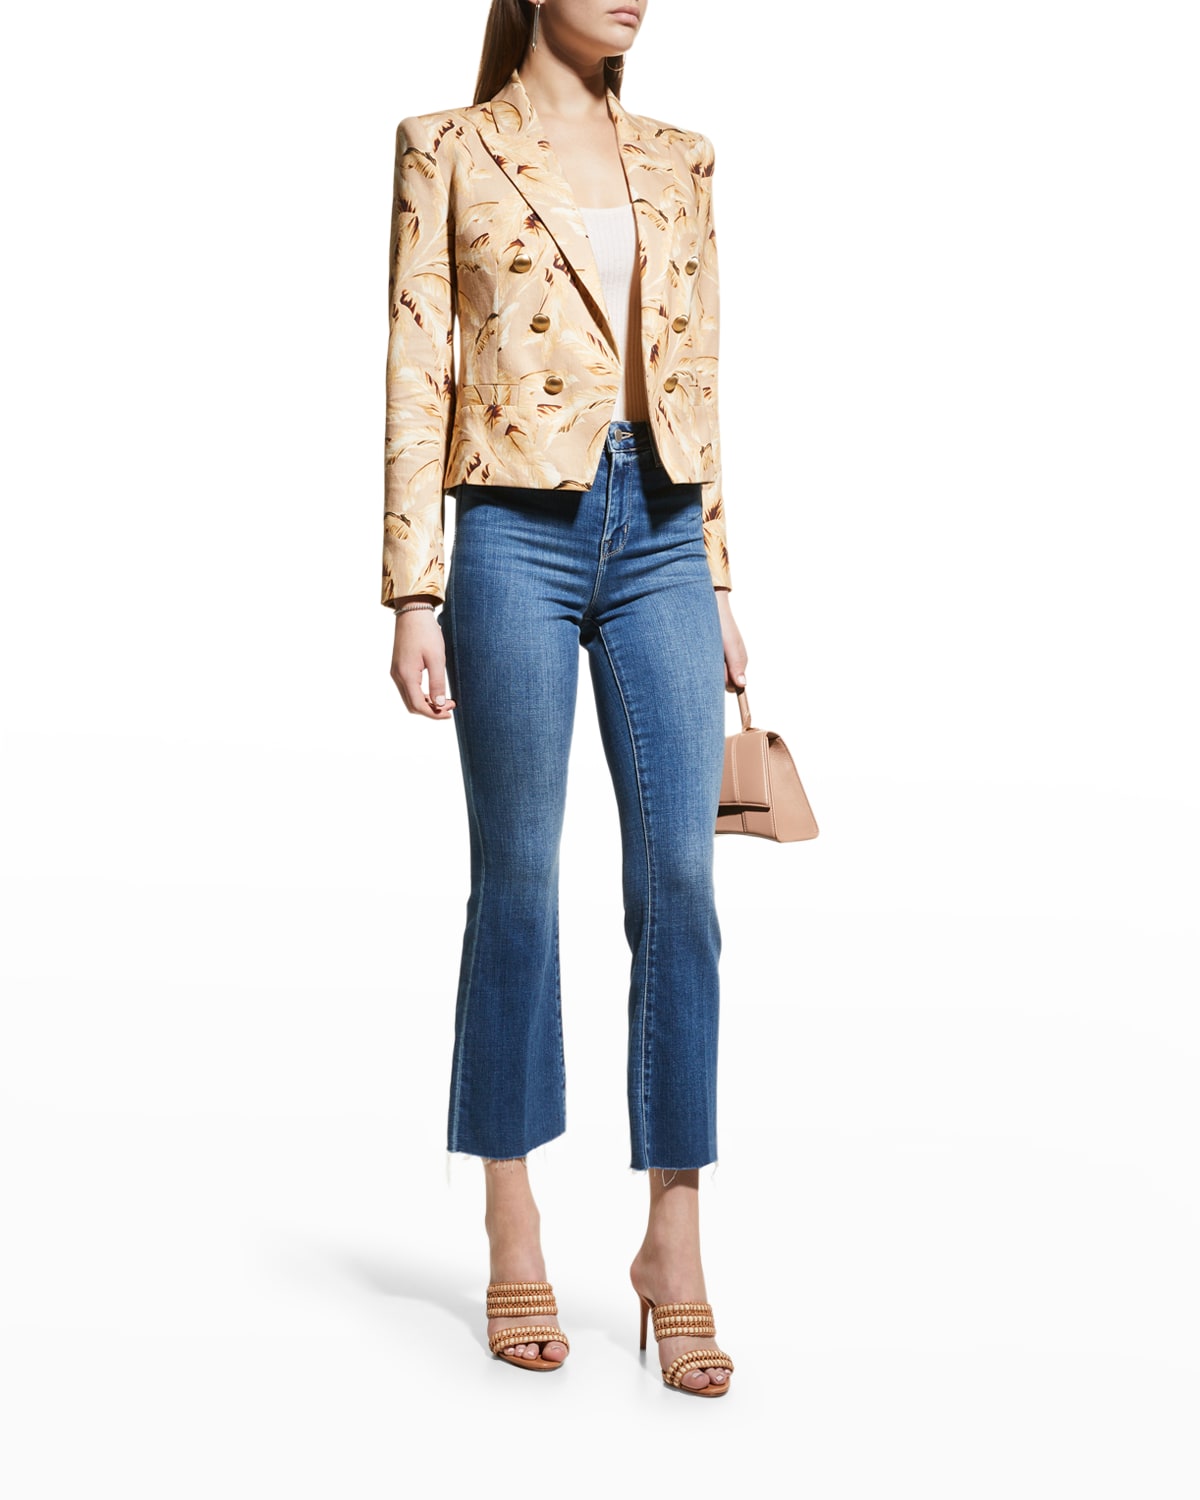 L'Agence Bell High-Rise Flare Jeans | Neiman Marcus